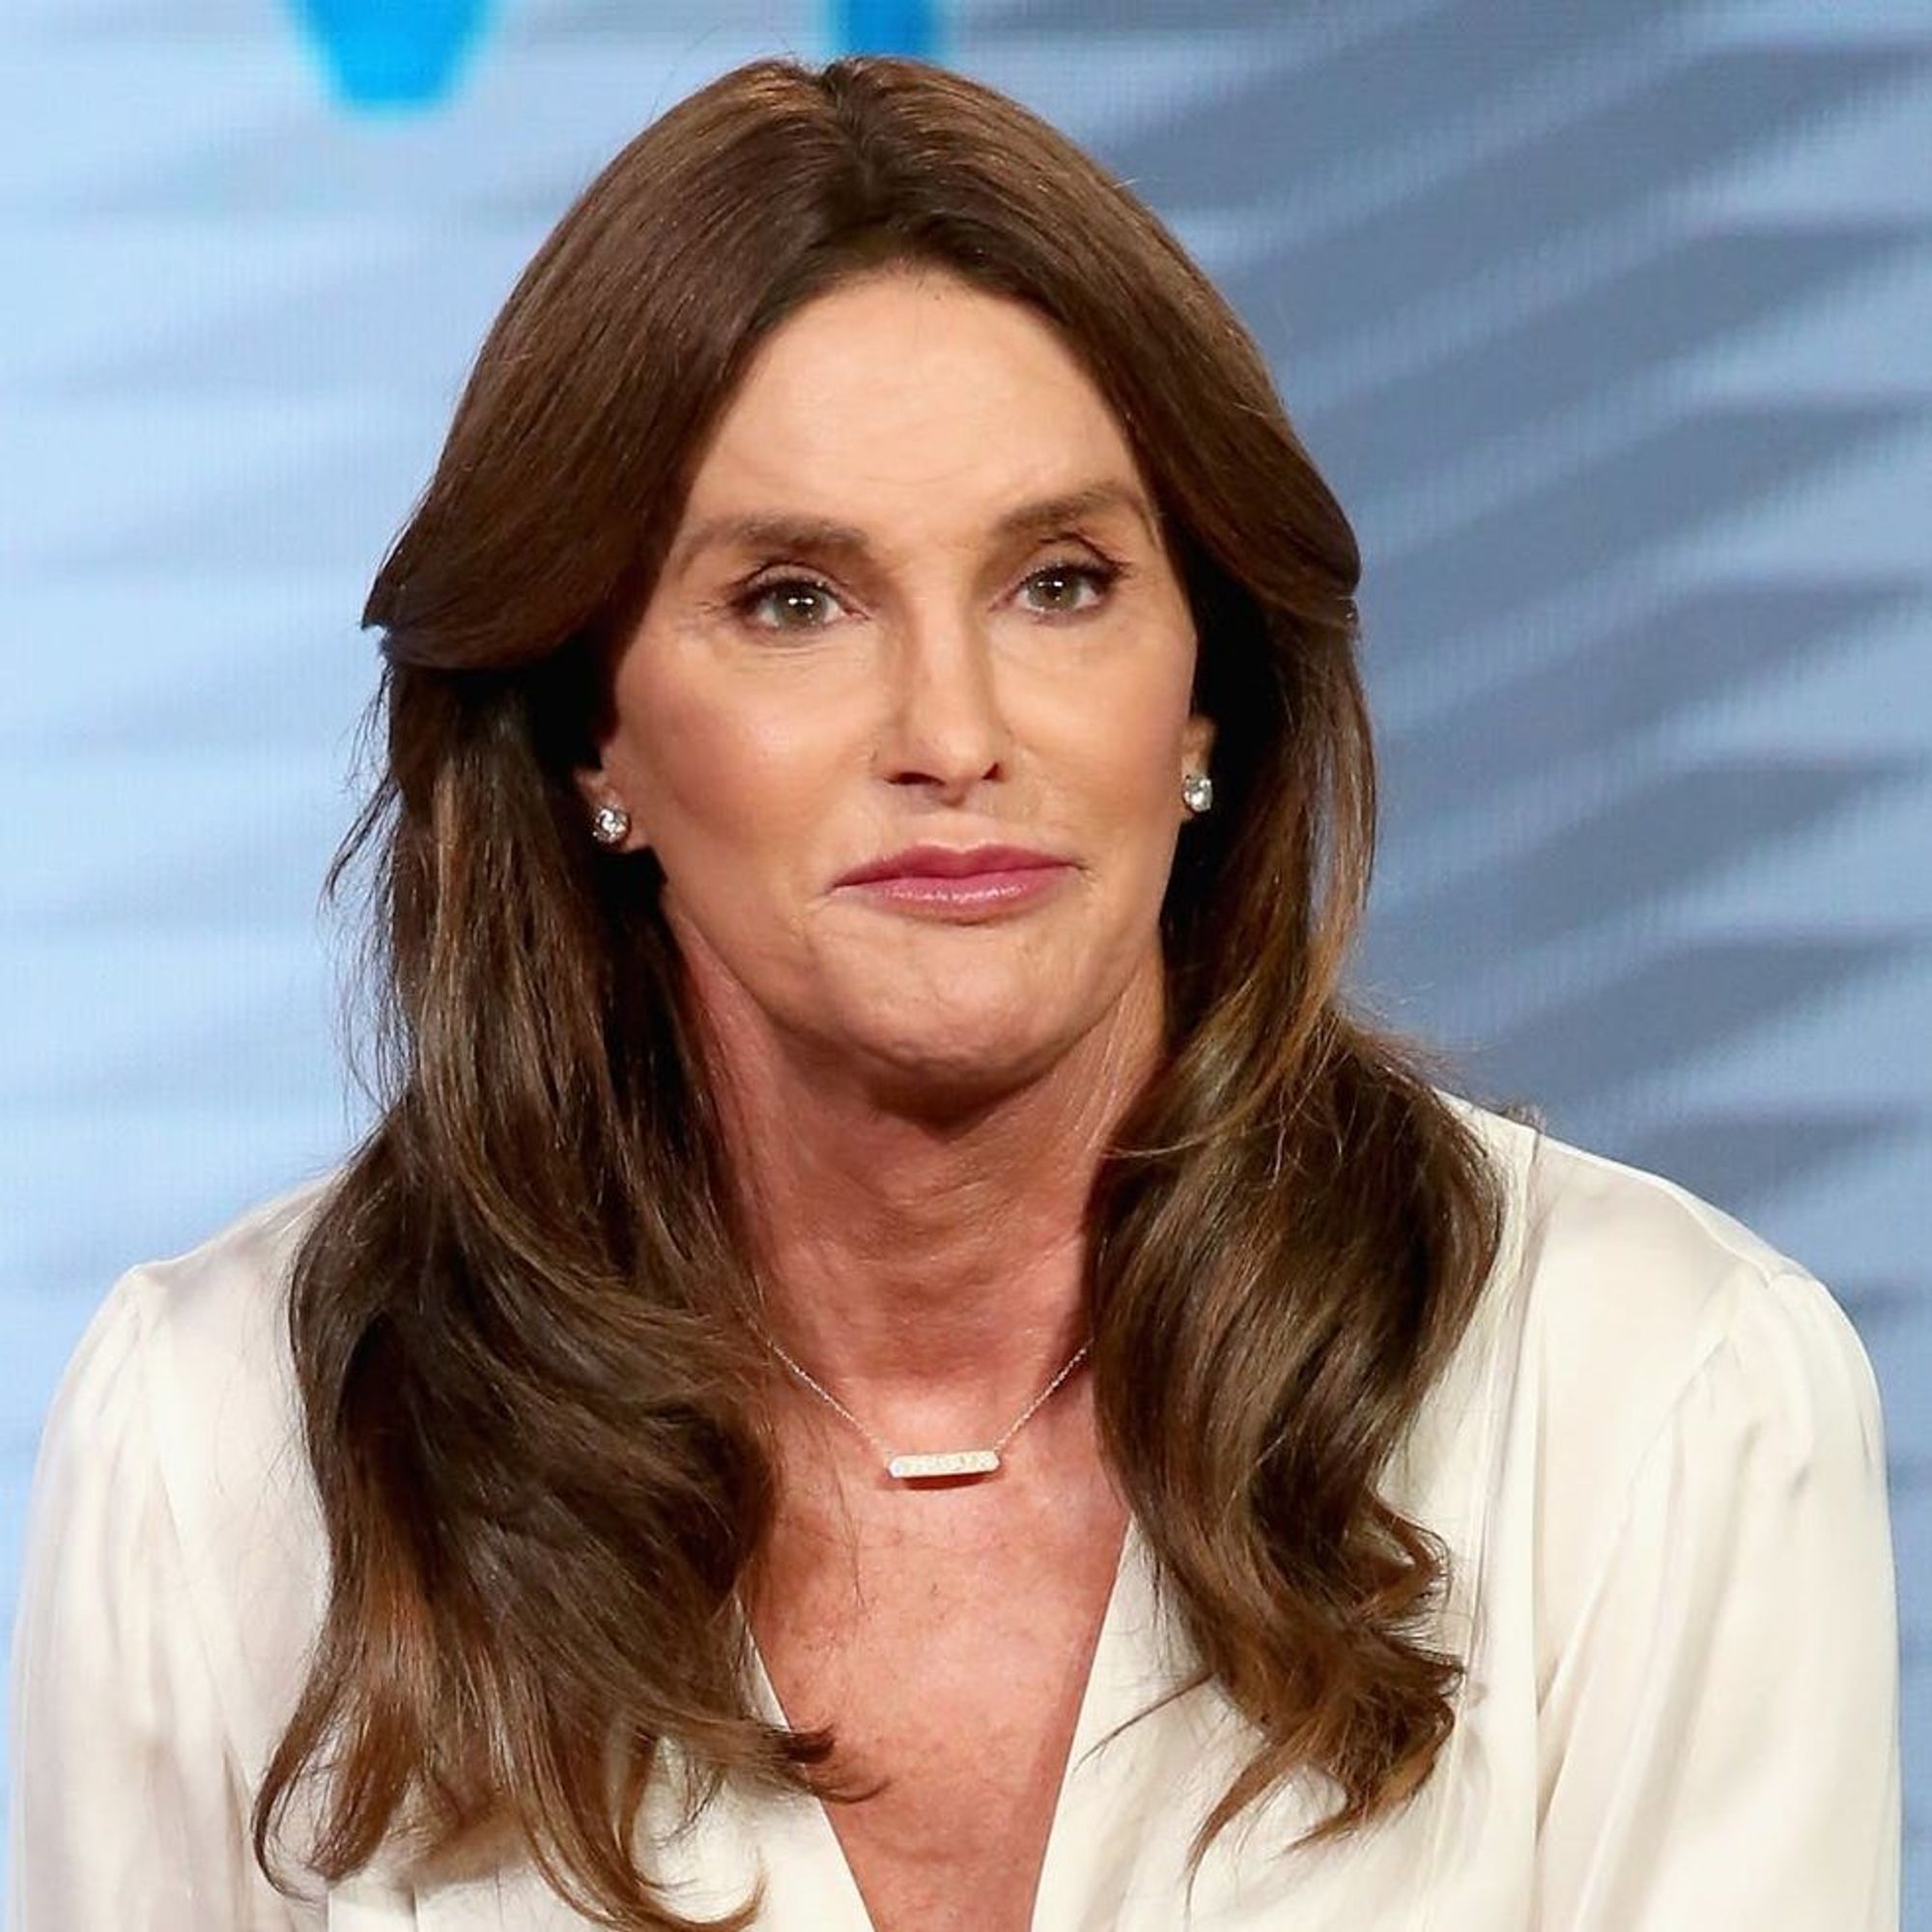 Caitlyn Jenner Opens Up About Life After Her “Final Surgery” Brit + Co